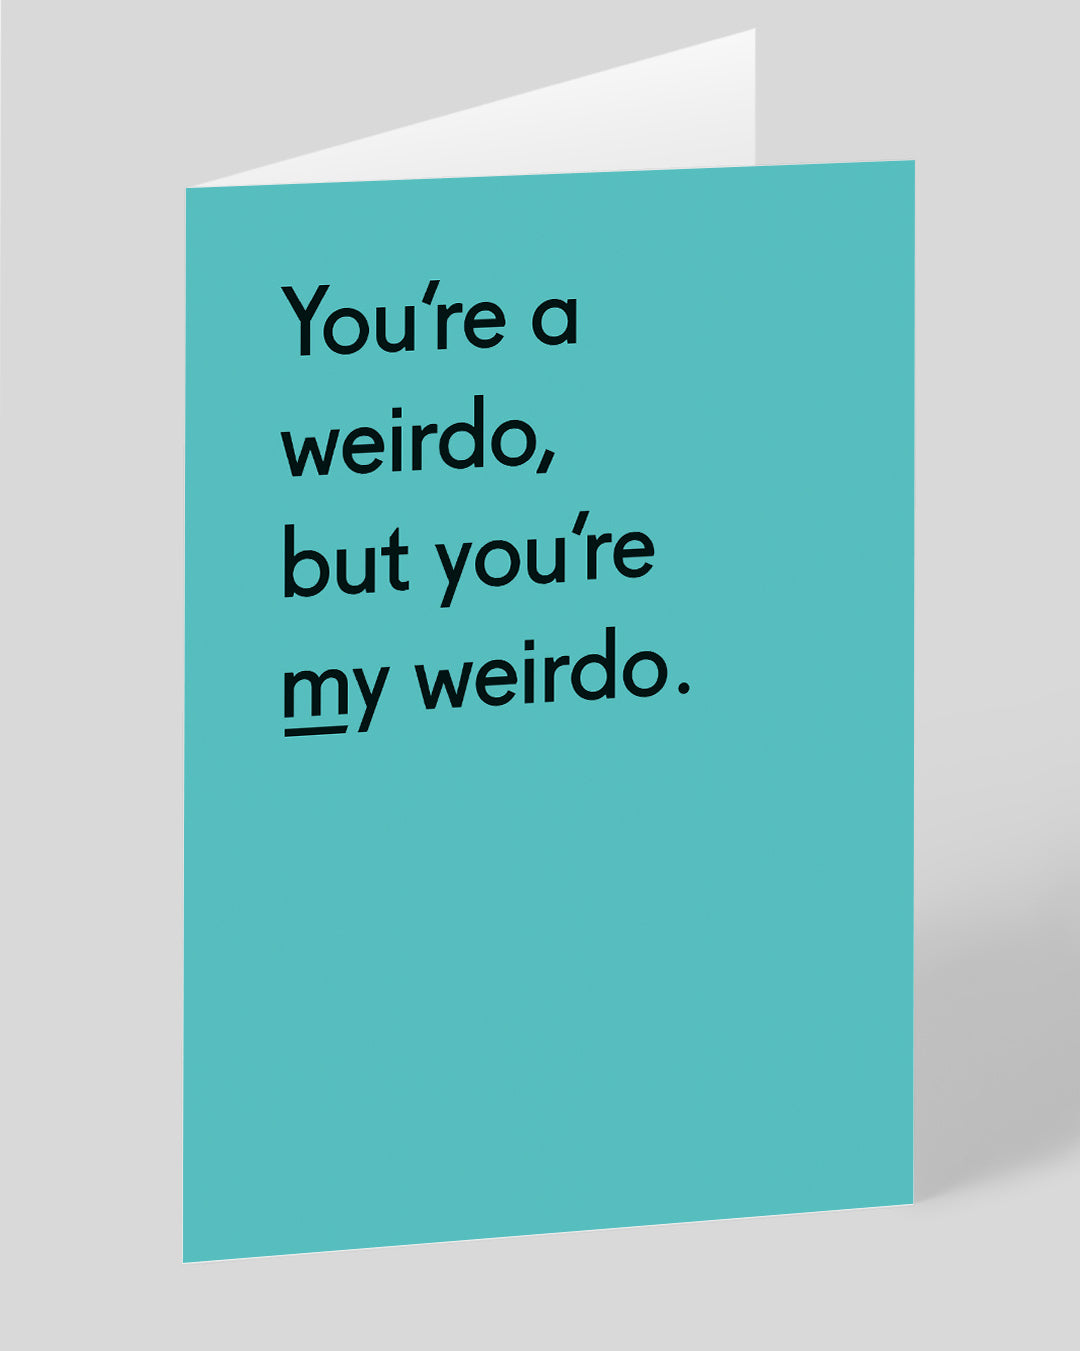 Valentine’s Day | Cute Valentines Card For Dog Lovers | Personalised You’re My Weirdo Greeting Card | Ohh Deer Unique Valentine’s Card for Him or Her | Made In The UK, Eco-Friendly Materials, Plastic Free Packaging